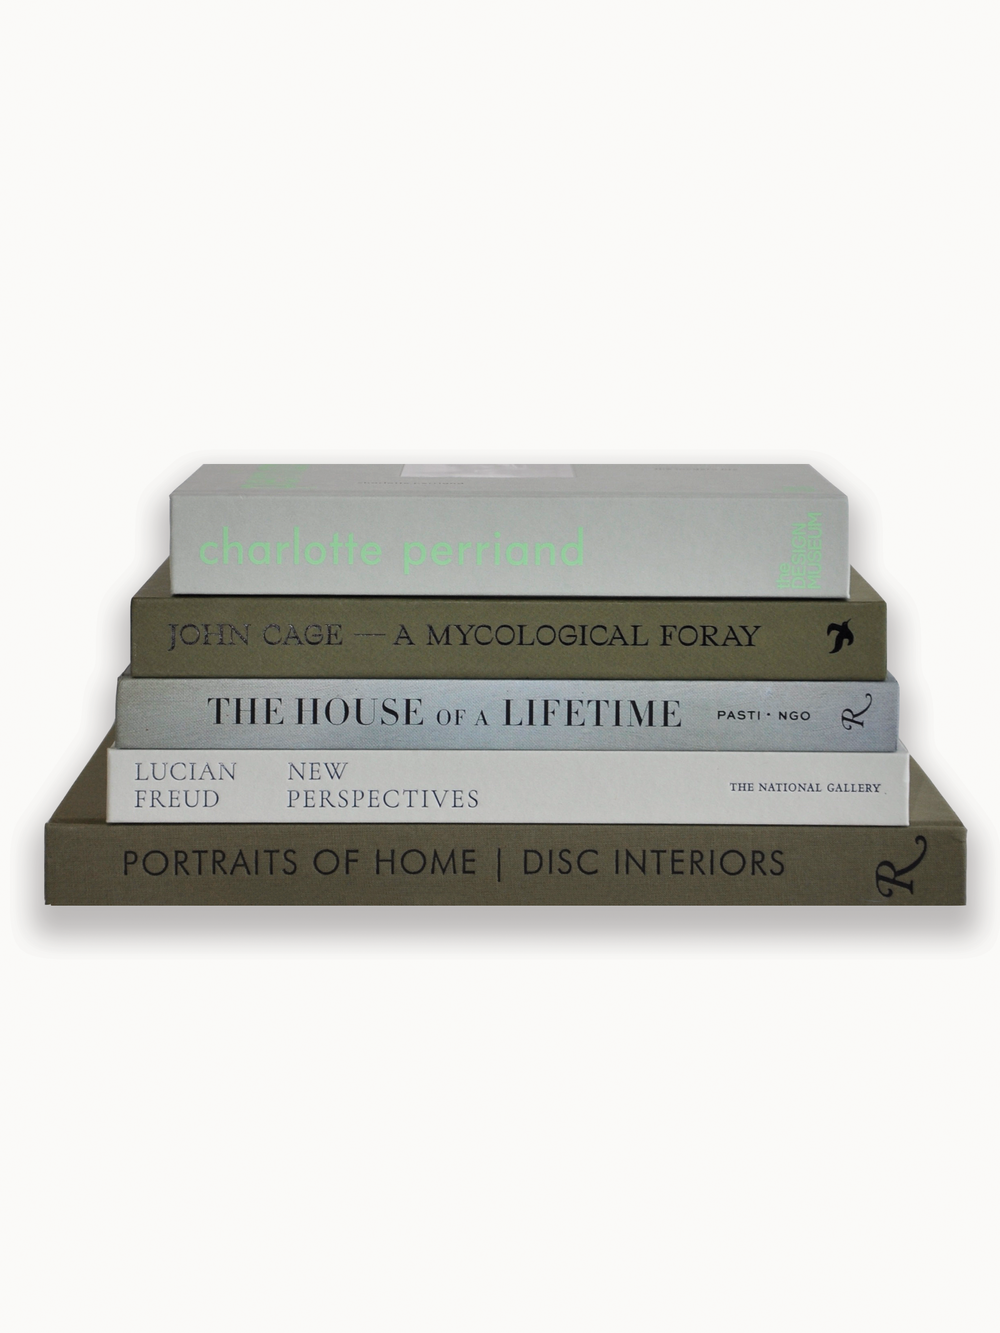 Home: Decorative Book To Stack Together On Coffee Tables